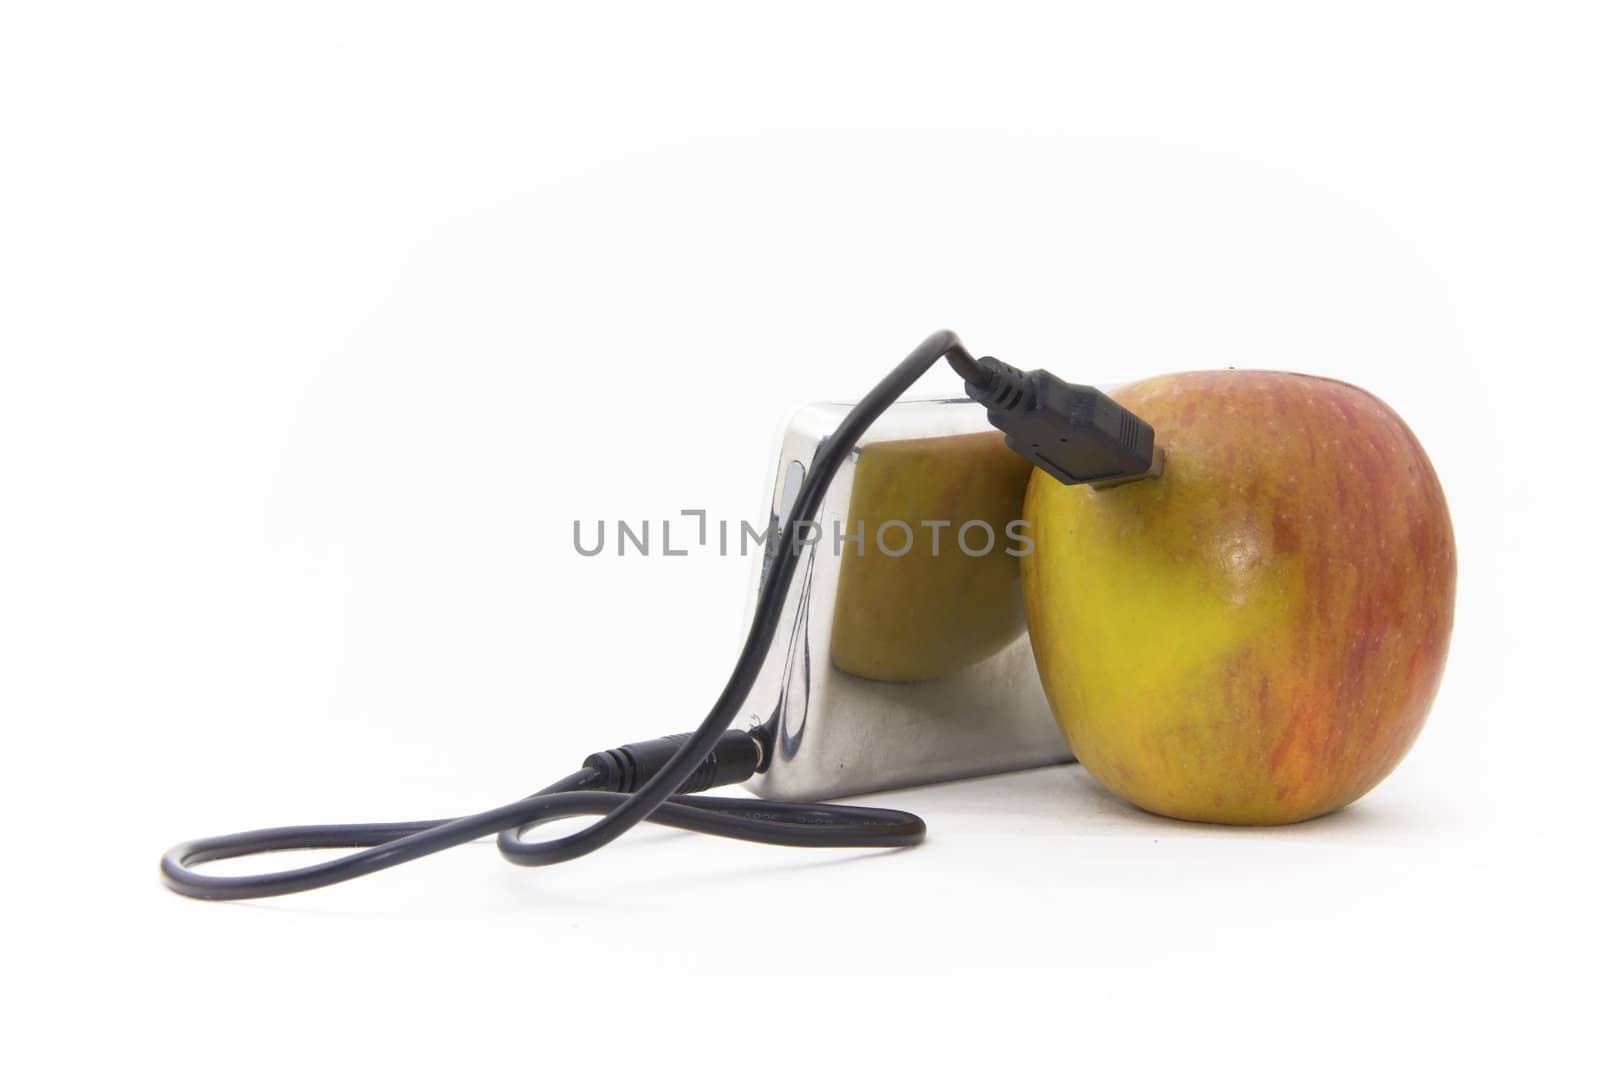 An apple connected to an MP3 player over a wire cable.